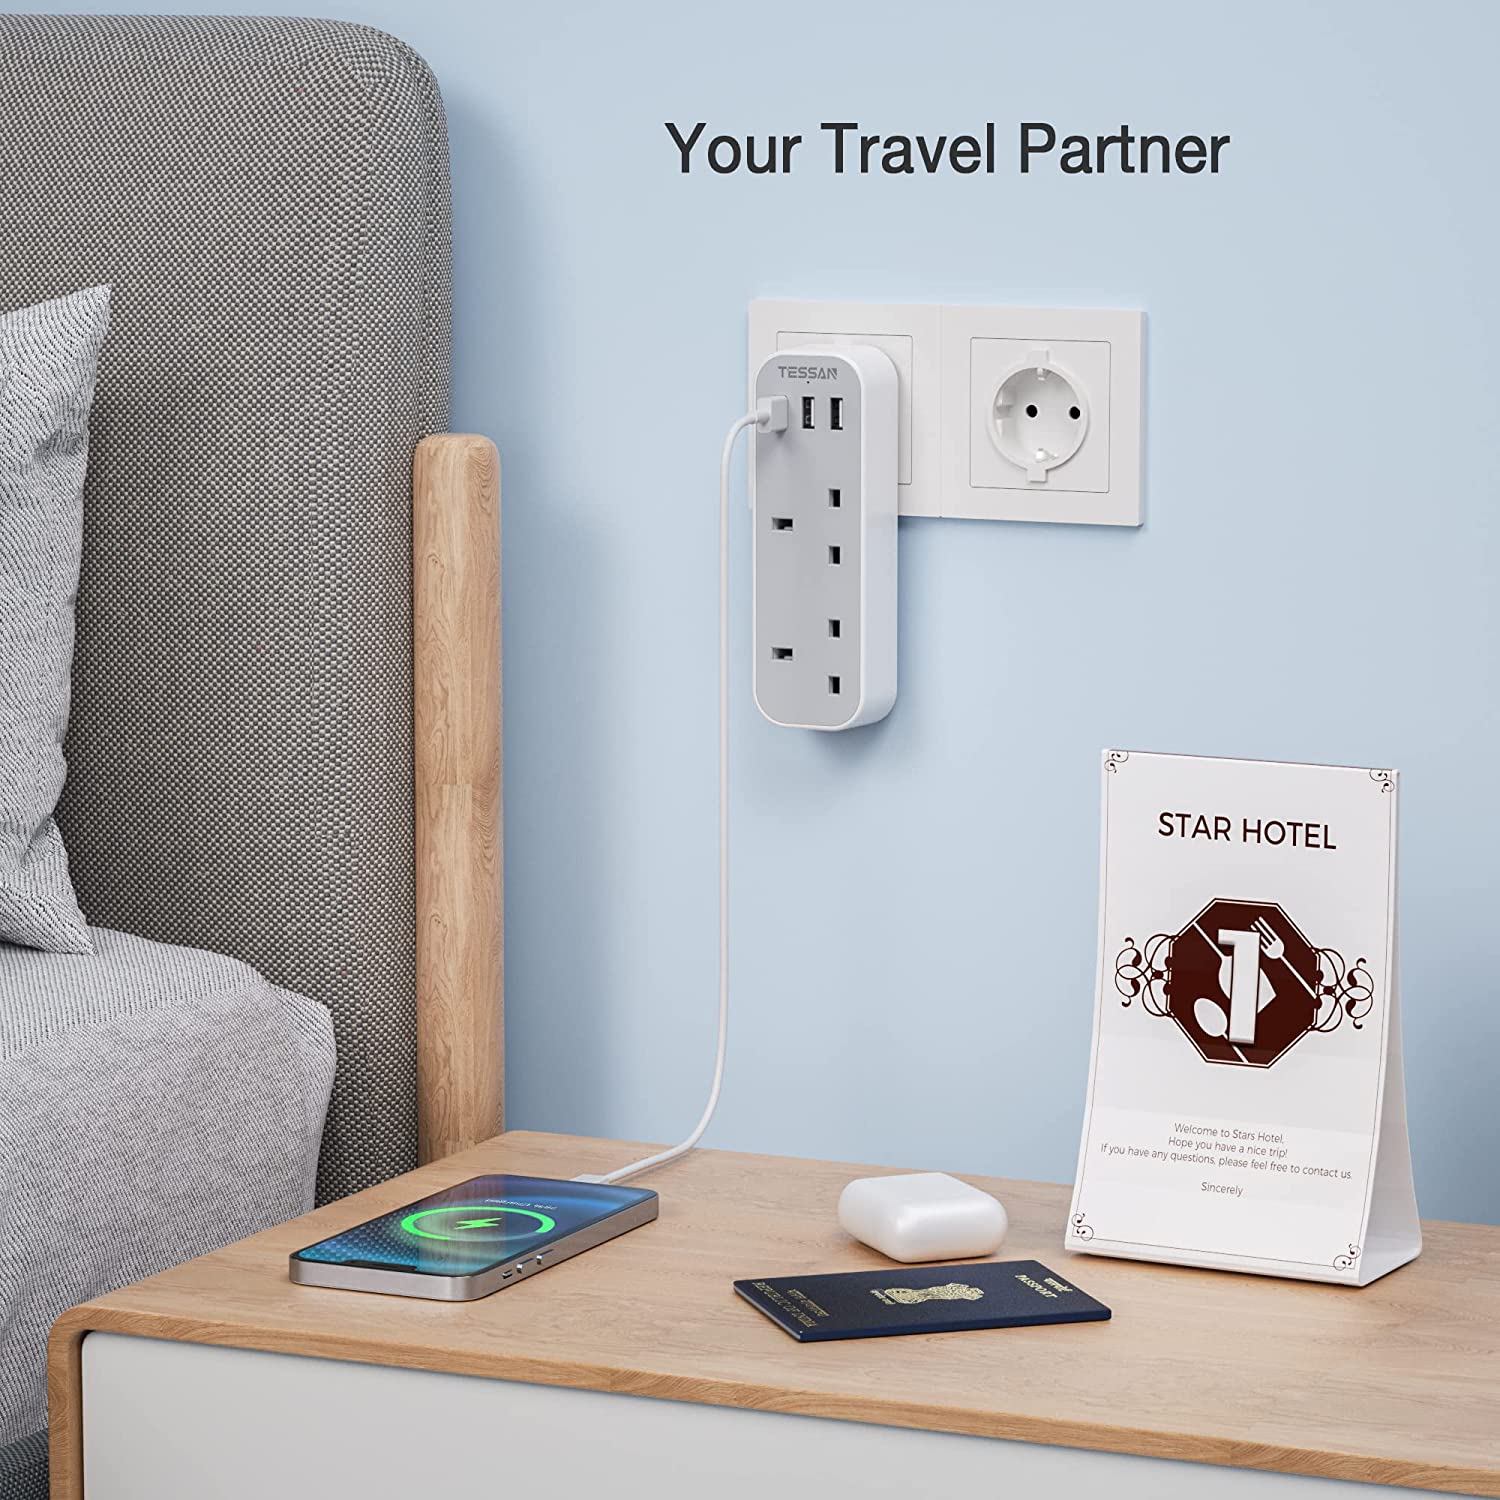 UK to European Plug Adapter with 3 USB 2 AC outlets